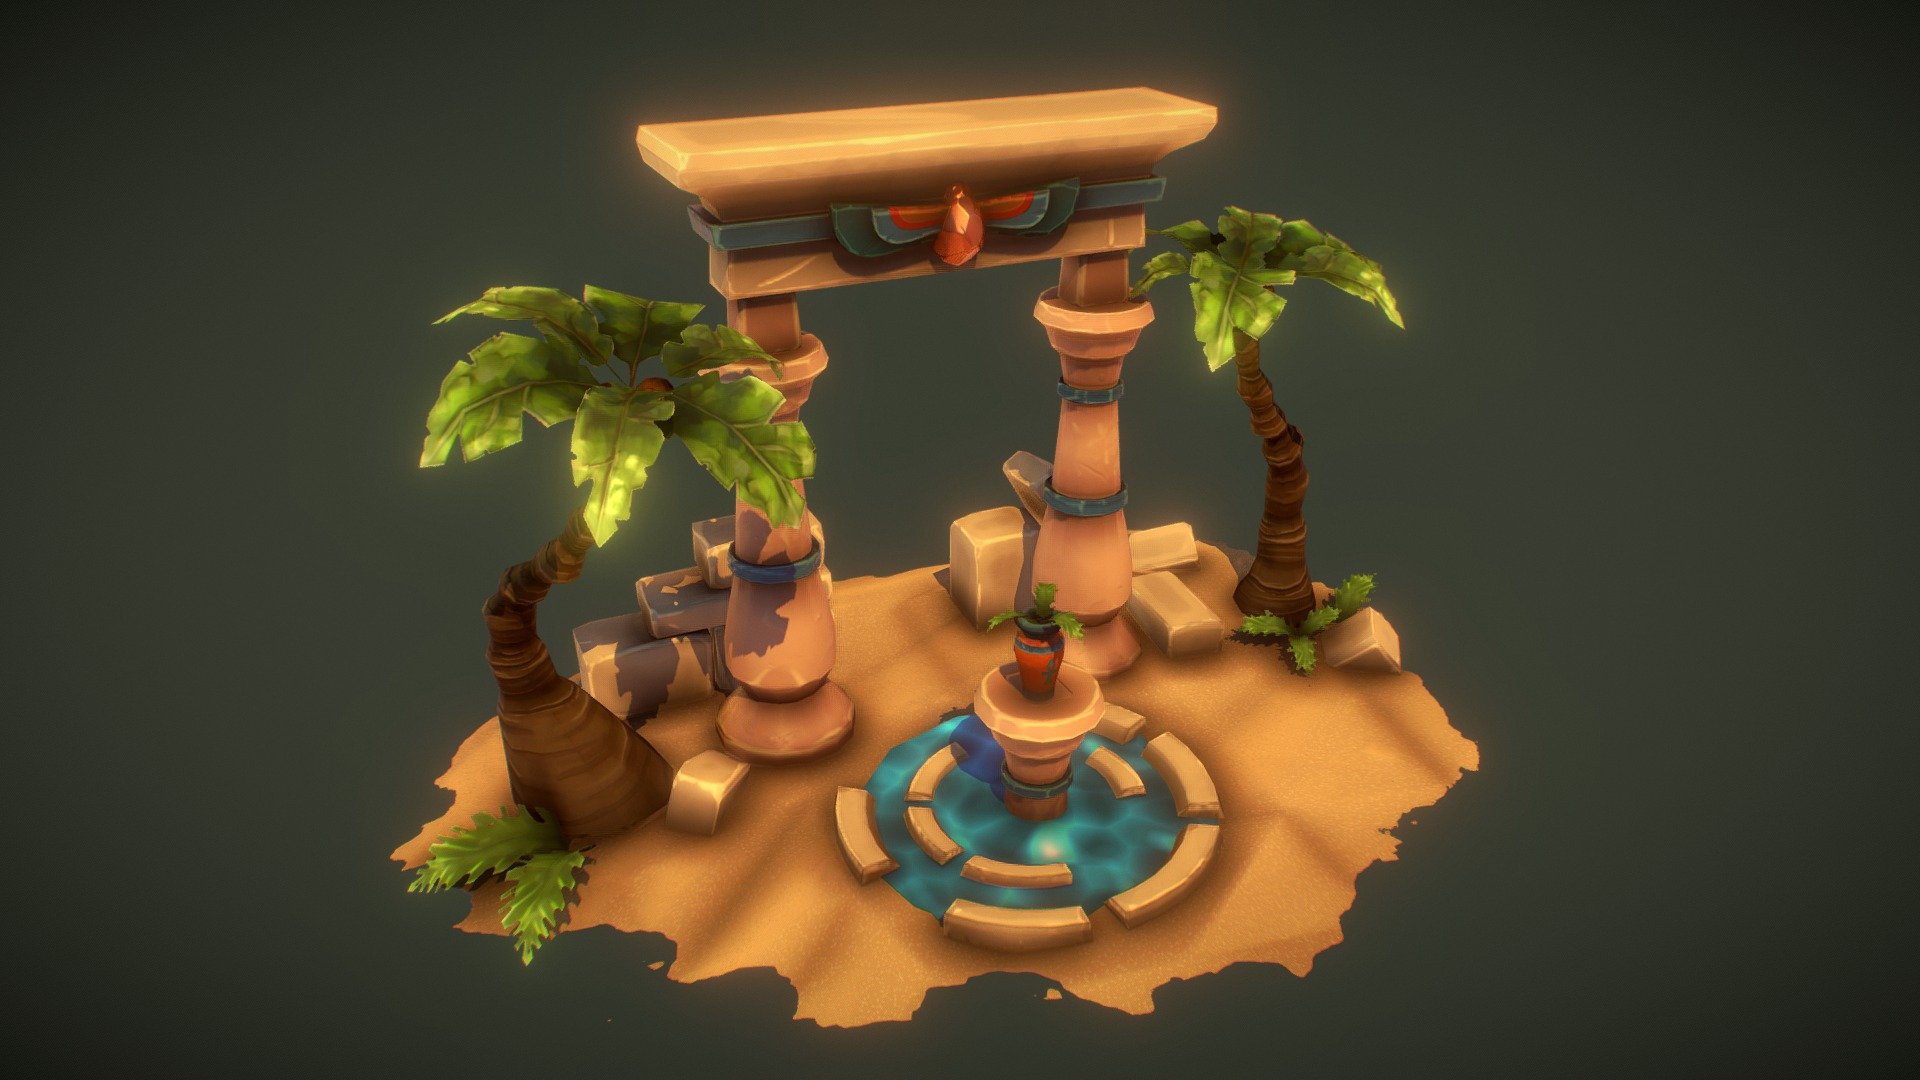 https://www.artstation.com/artwork/aY1bKk

Model created with protips from Jasmin Habezai-Fekri's artstation learning. 
Go check the link below, it's awesome ! 

https://www.artstation.com/learning/courses/yBx/creating-a-hand-painted-diorama-in-blender/chapters/zgO/presentation-lighting-inside-marmoset - Desert Oasis - 3D model by Mawime (@maxbdx) 3d model